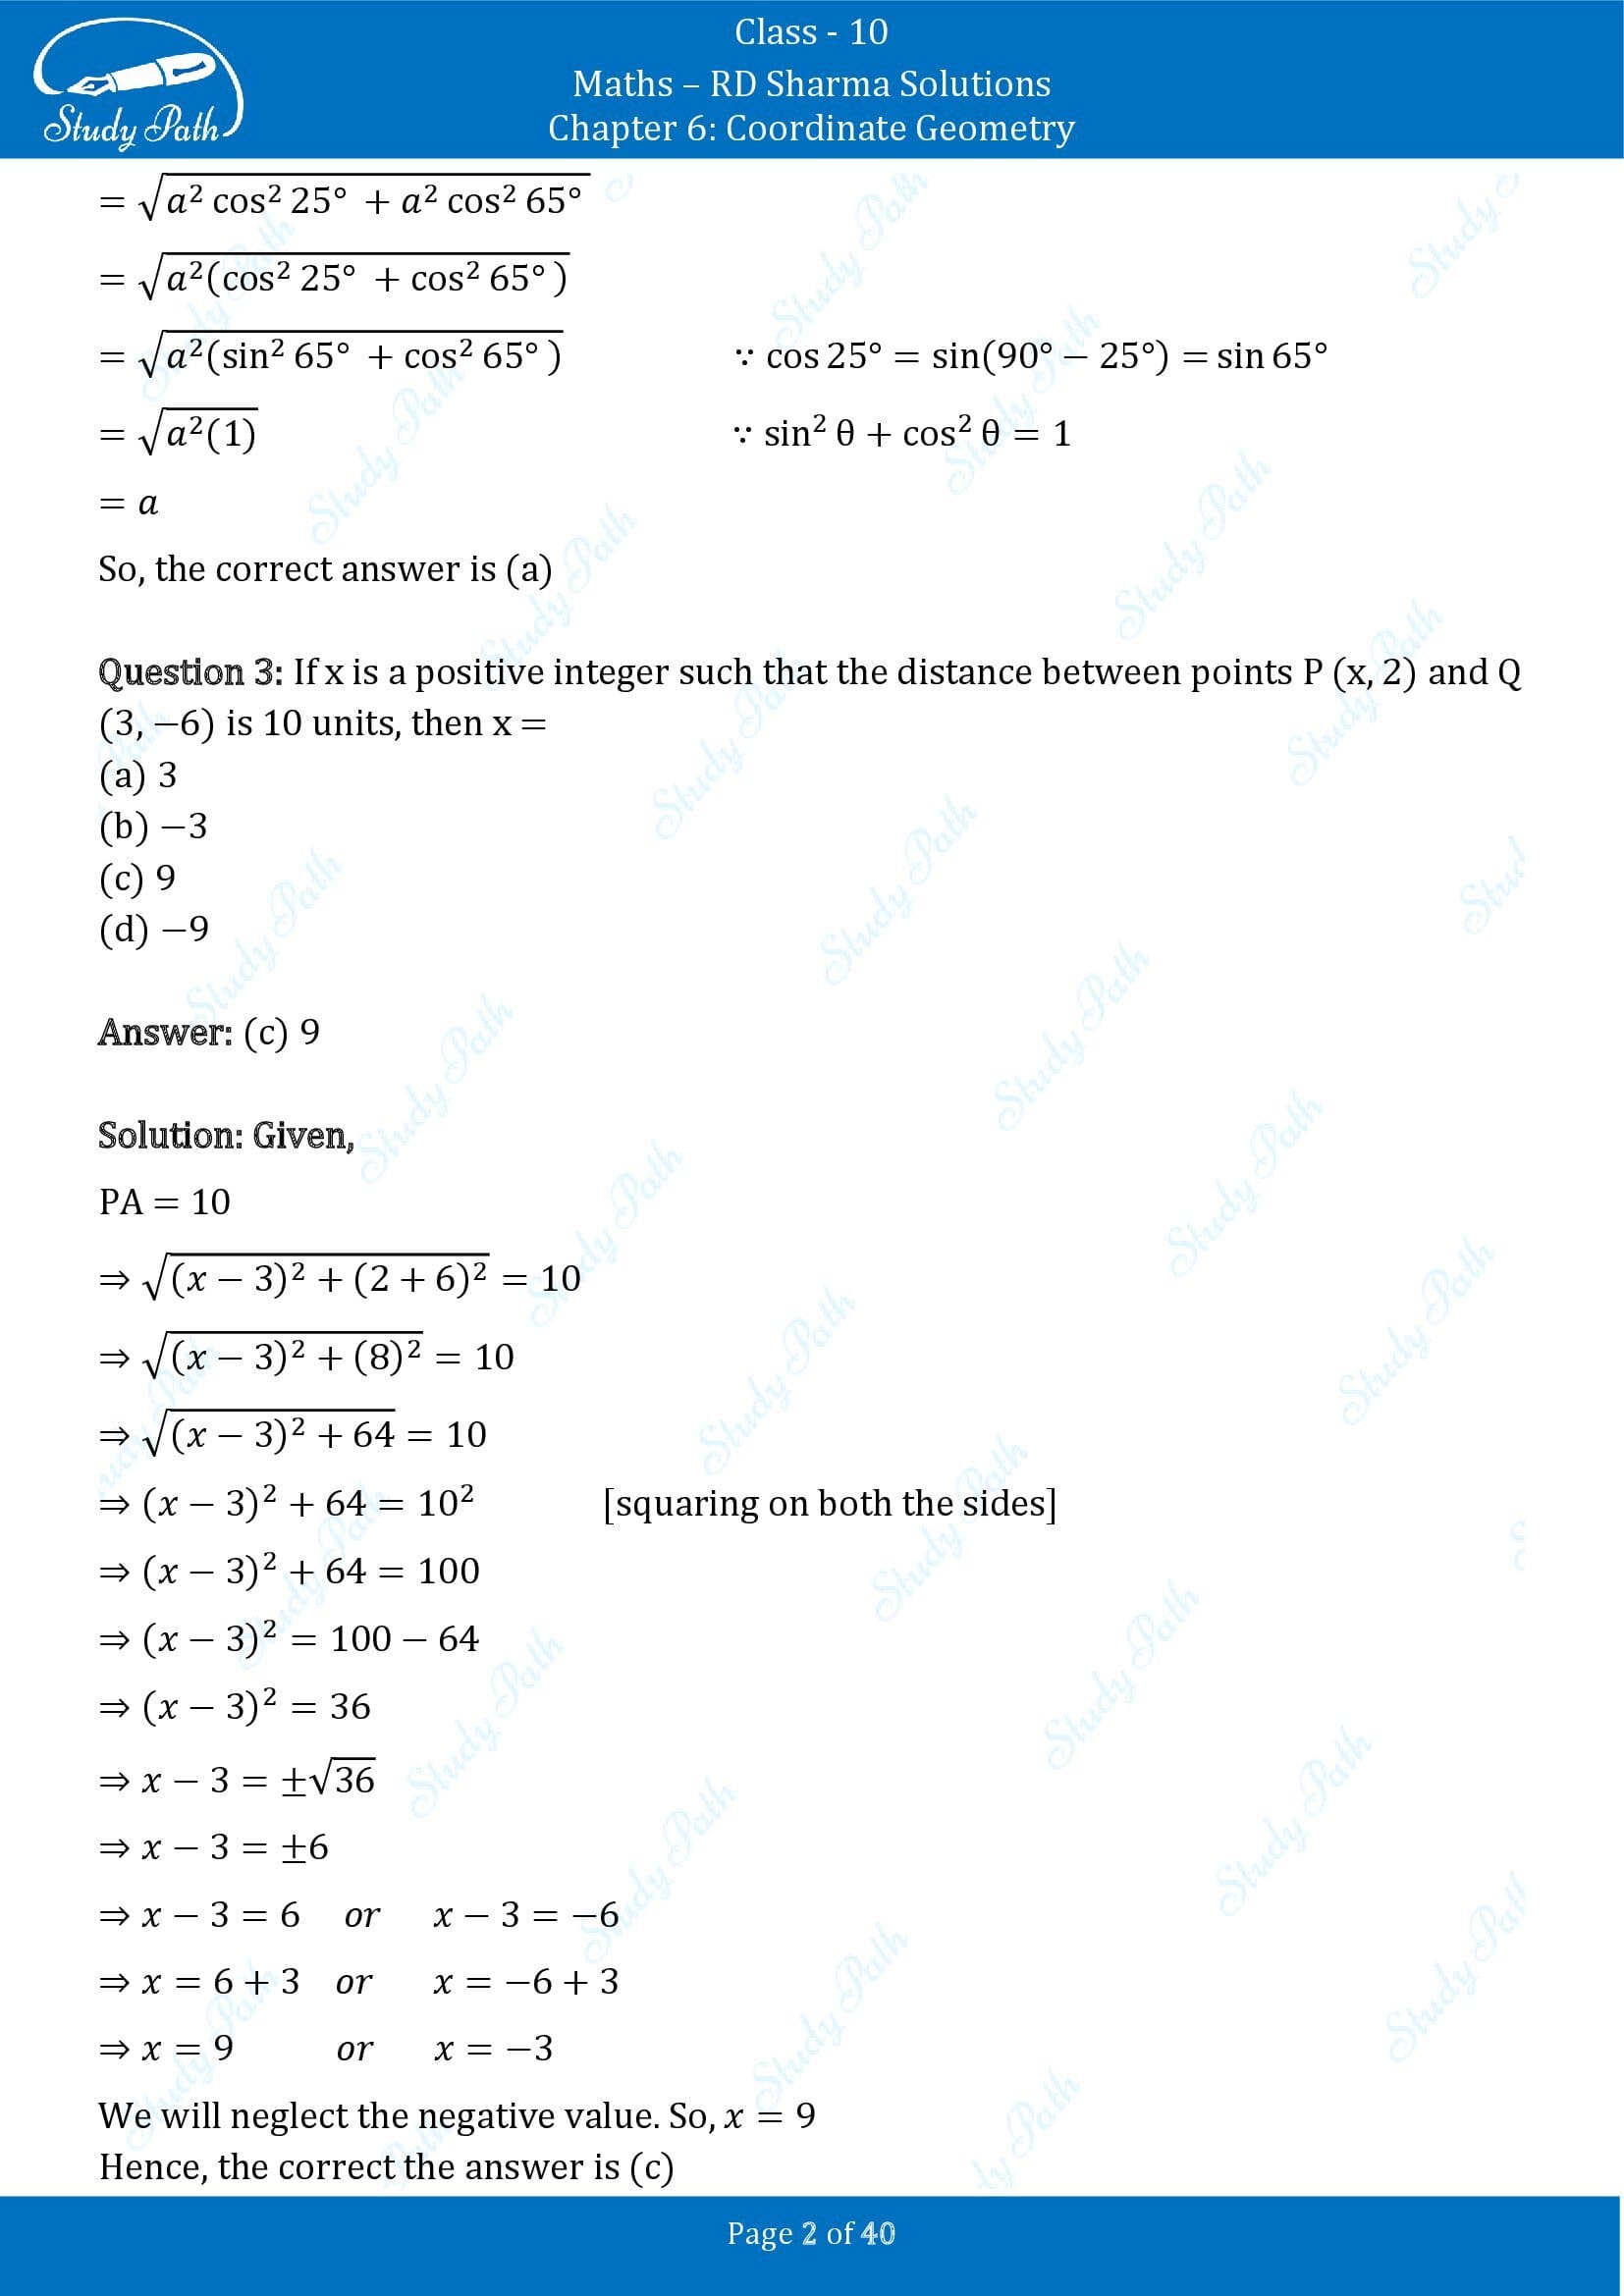 RD Sharma Solutions Class 10 Chapter 6 Coordinate Geometry Multiple Choice Question MCQs 00002